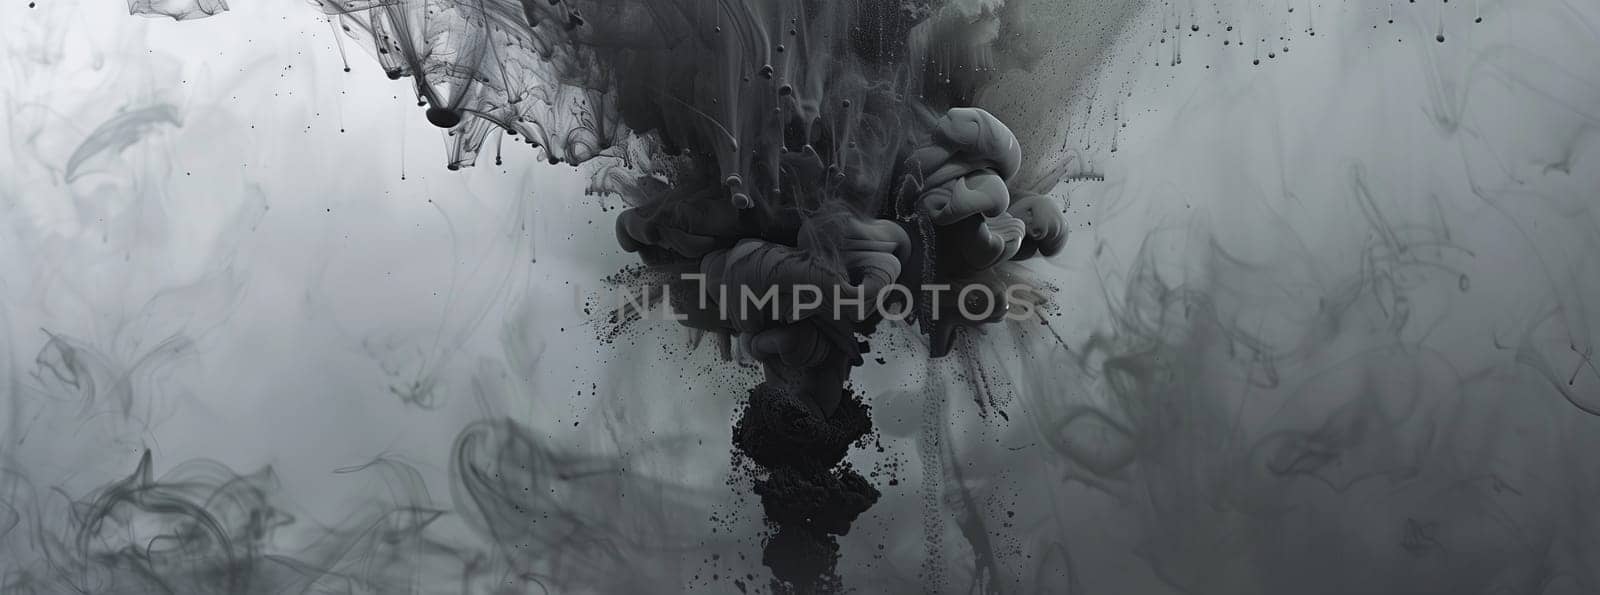 Monochrome photography capturing black smoke emerging from pipe by richwolf